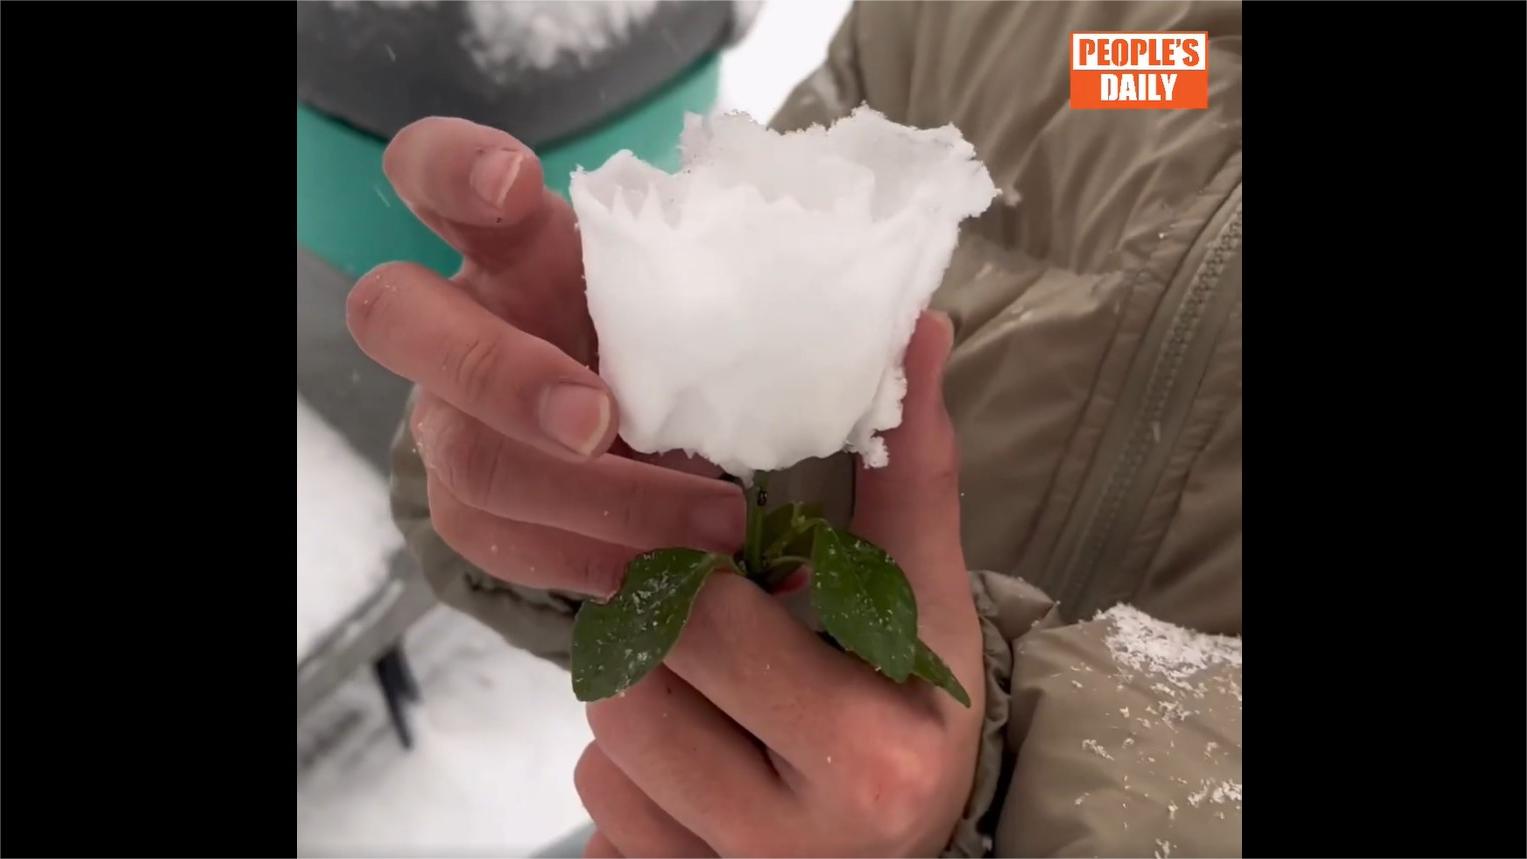 Winter romance: Creative young Chinese man makes rose with snow